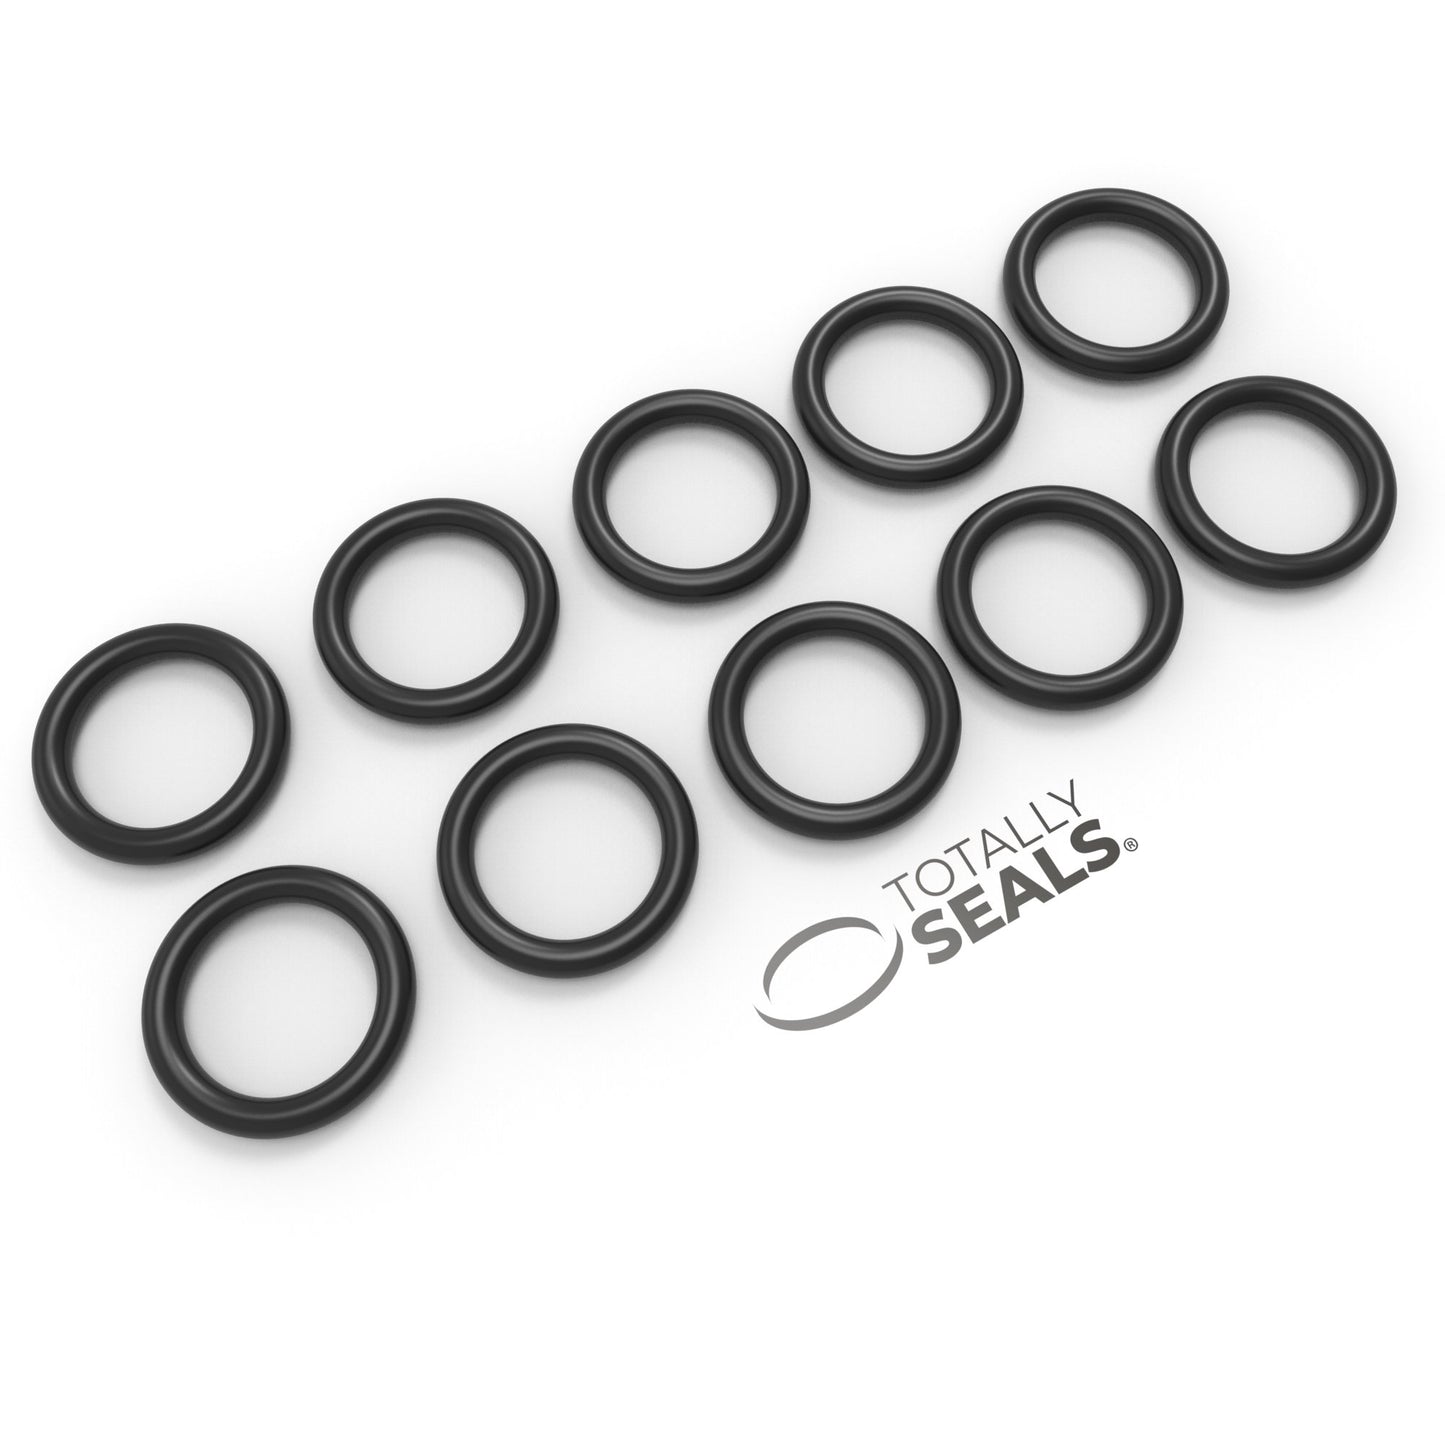 1-1/8" x 1/8" (BS216) Imperial Nitrile Rubber O-Rings - Totally Seals®